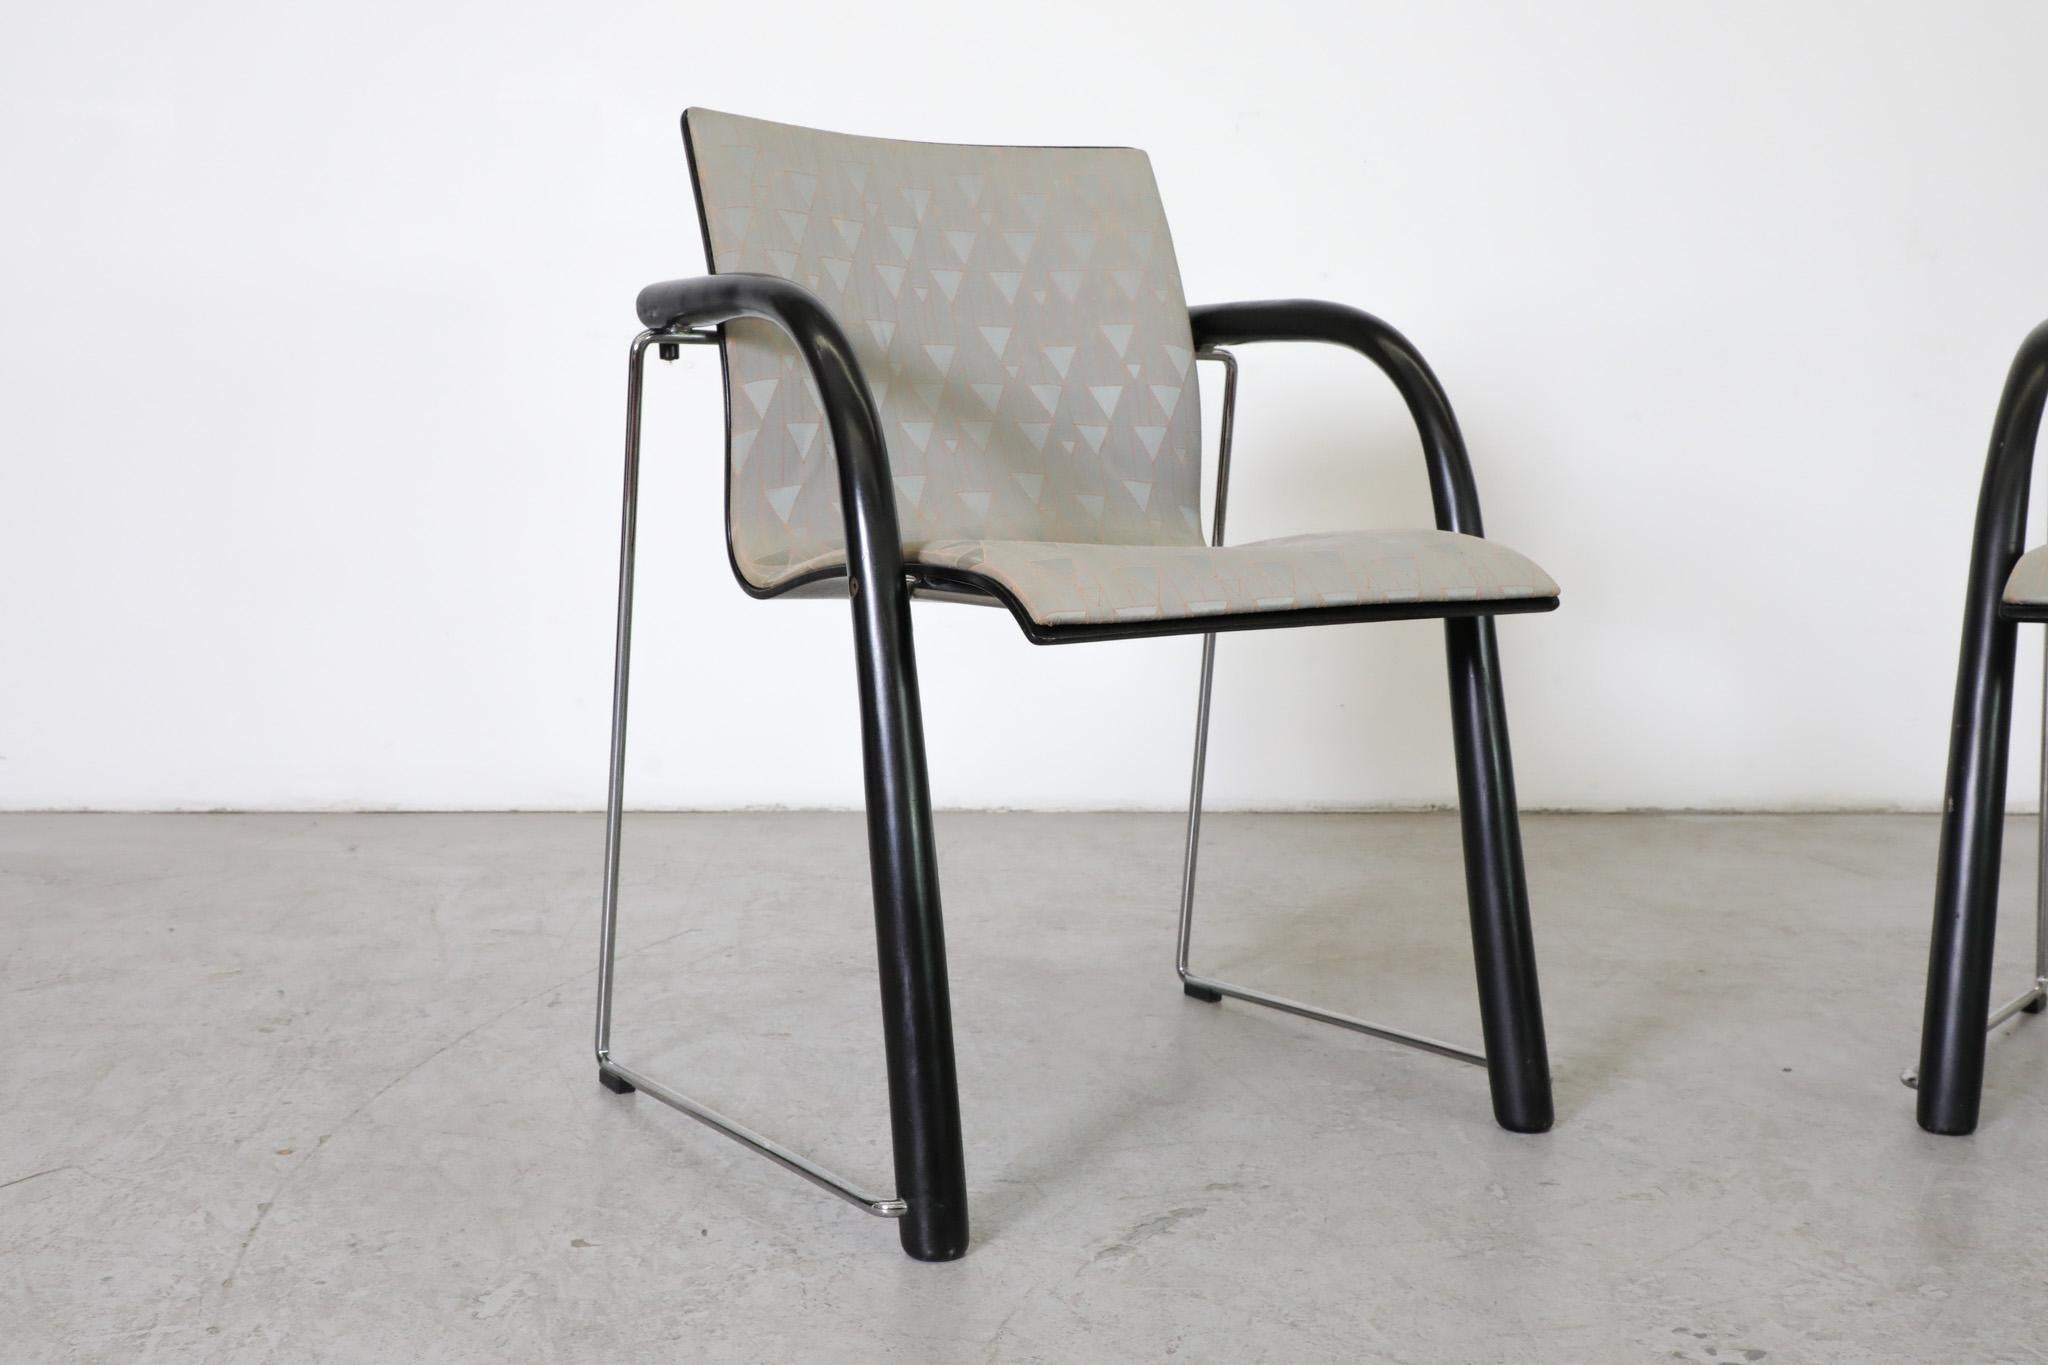 Pair of Thonet S320 by Wulf Schneider & Ulrich Böhme Chairs w/ Black Curved Arms For Sale 1